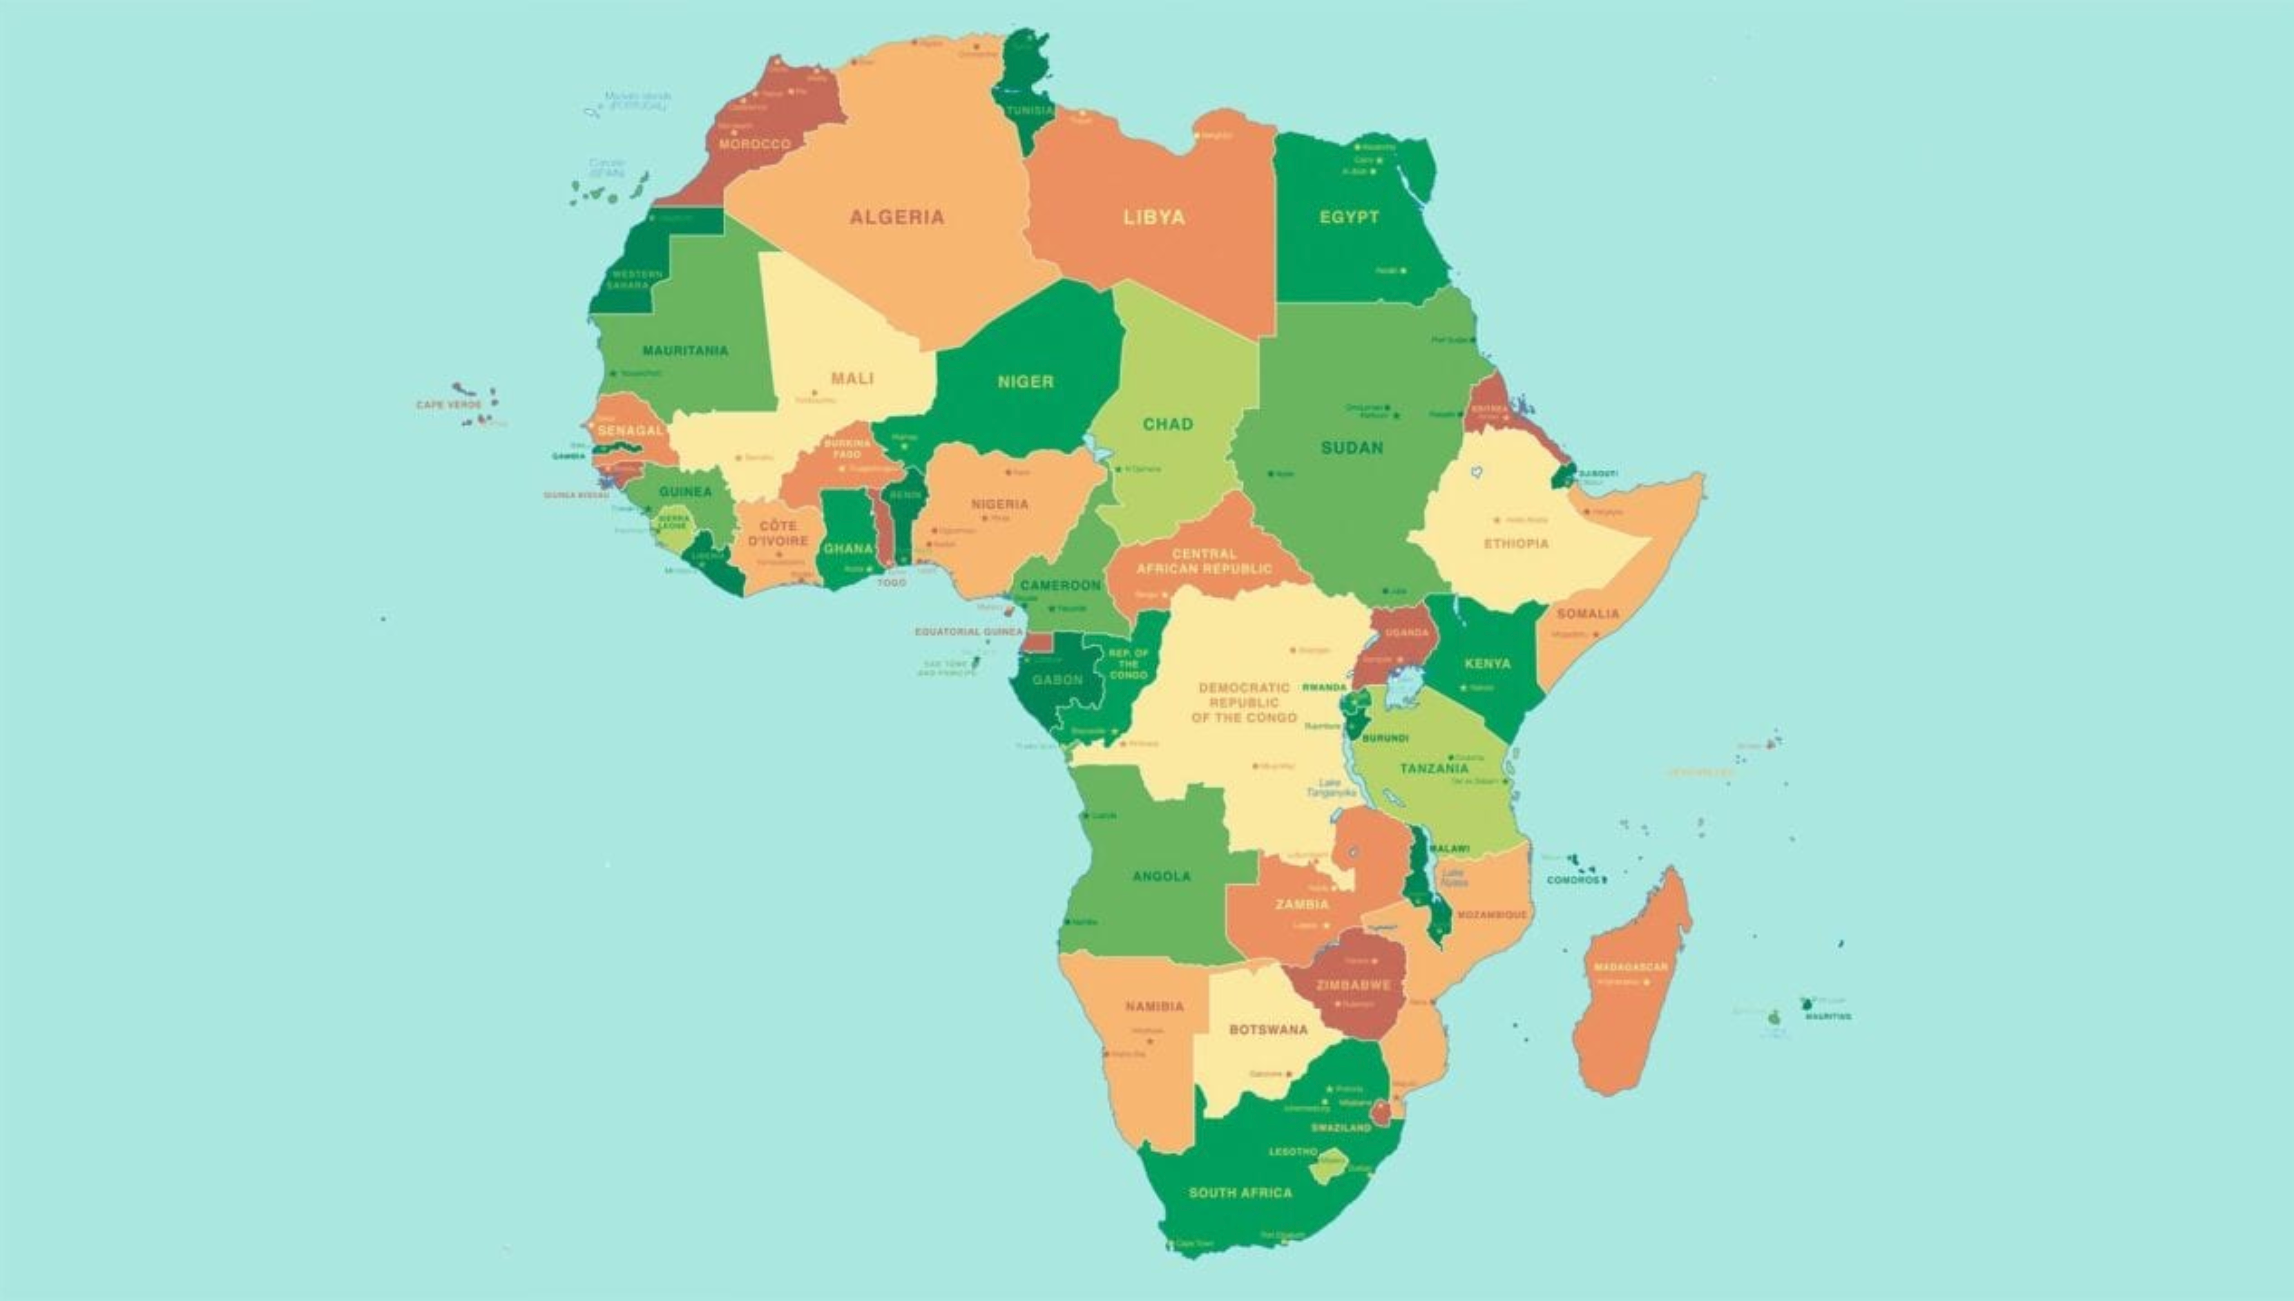 How (and why) do you see Africa?